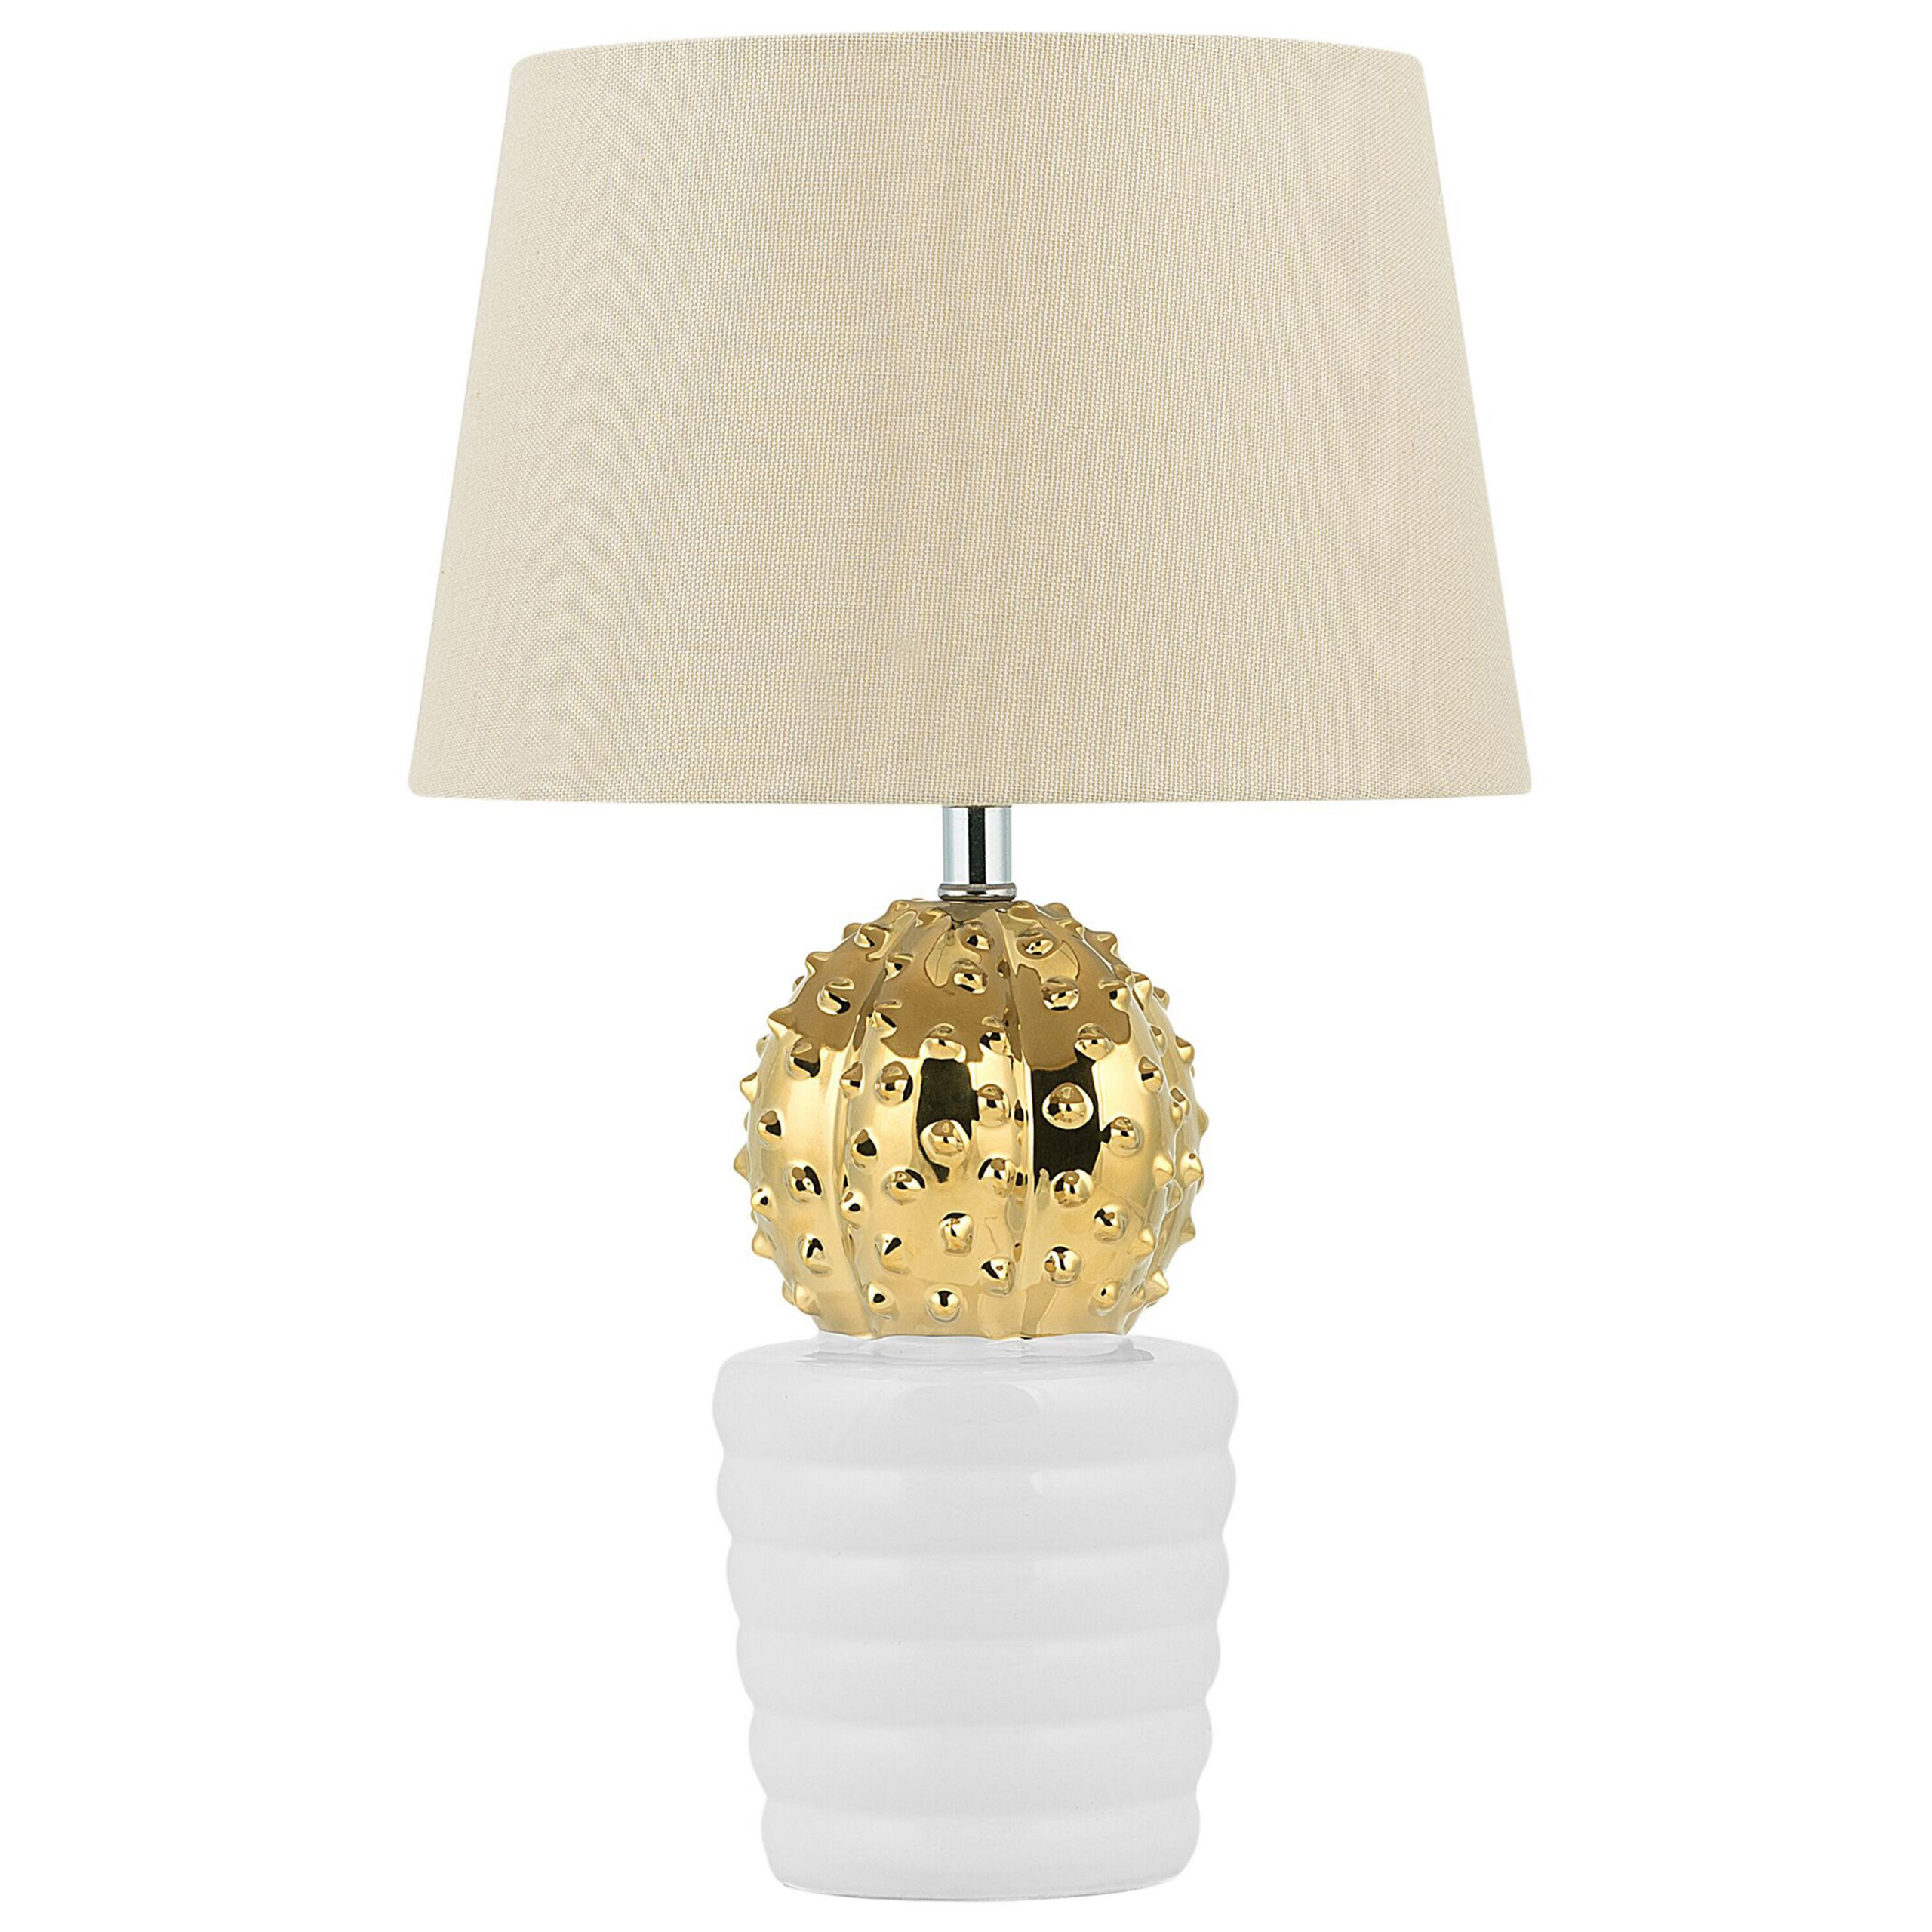 Beliani Table Lamp Gold with White and Beige Ceramic Eclectic Base Polyester Empire Shade Modern Design